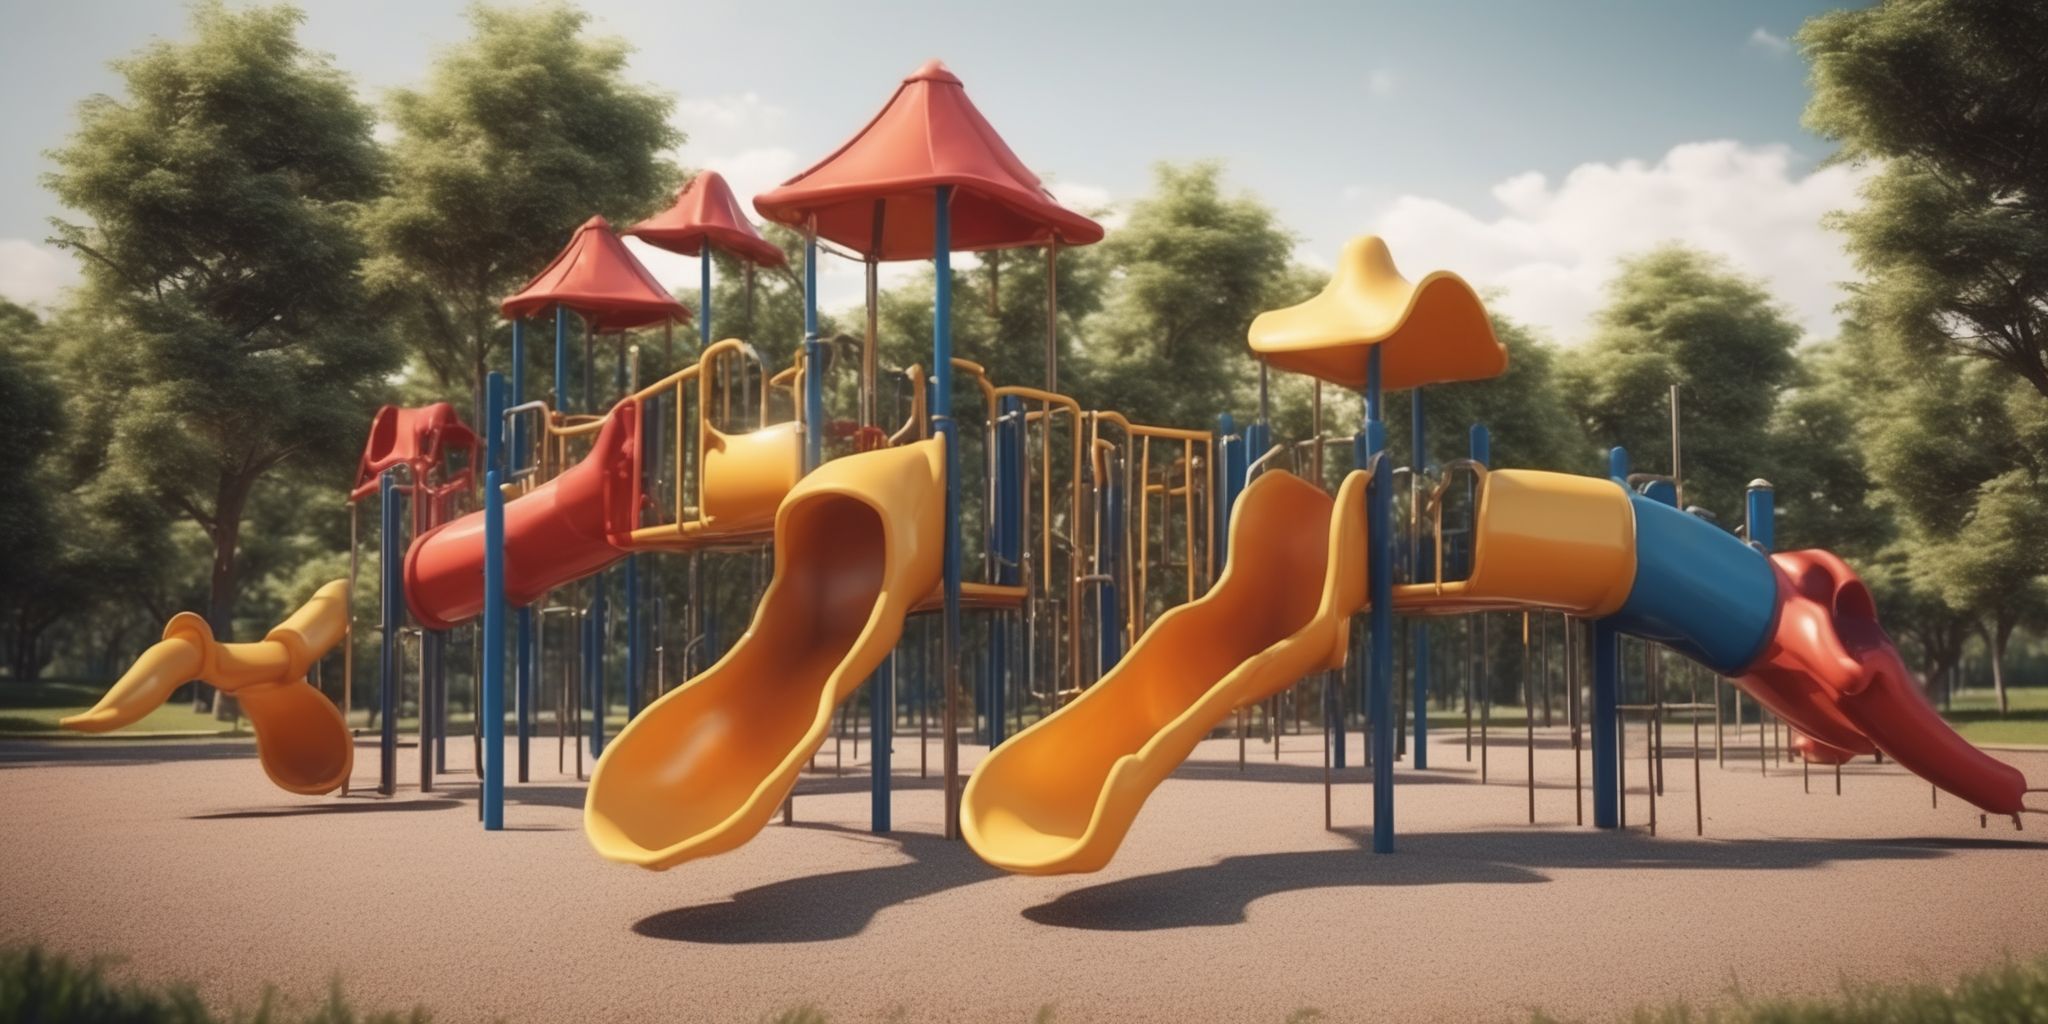 Playground  in realistic, photographic style